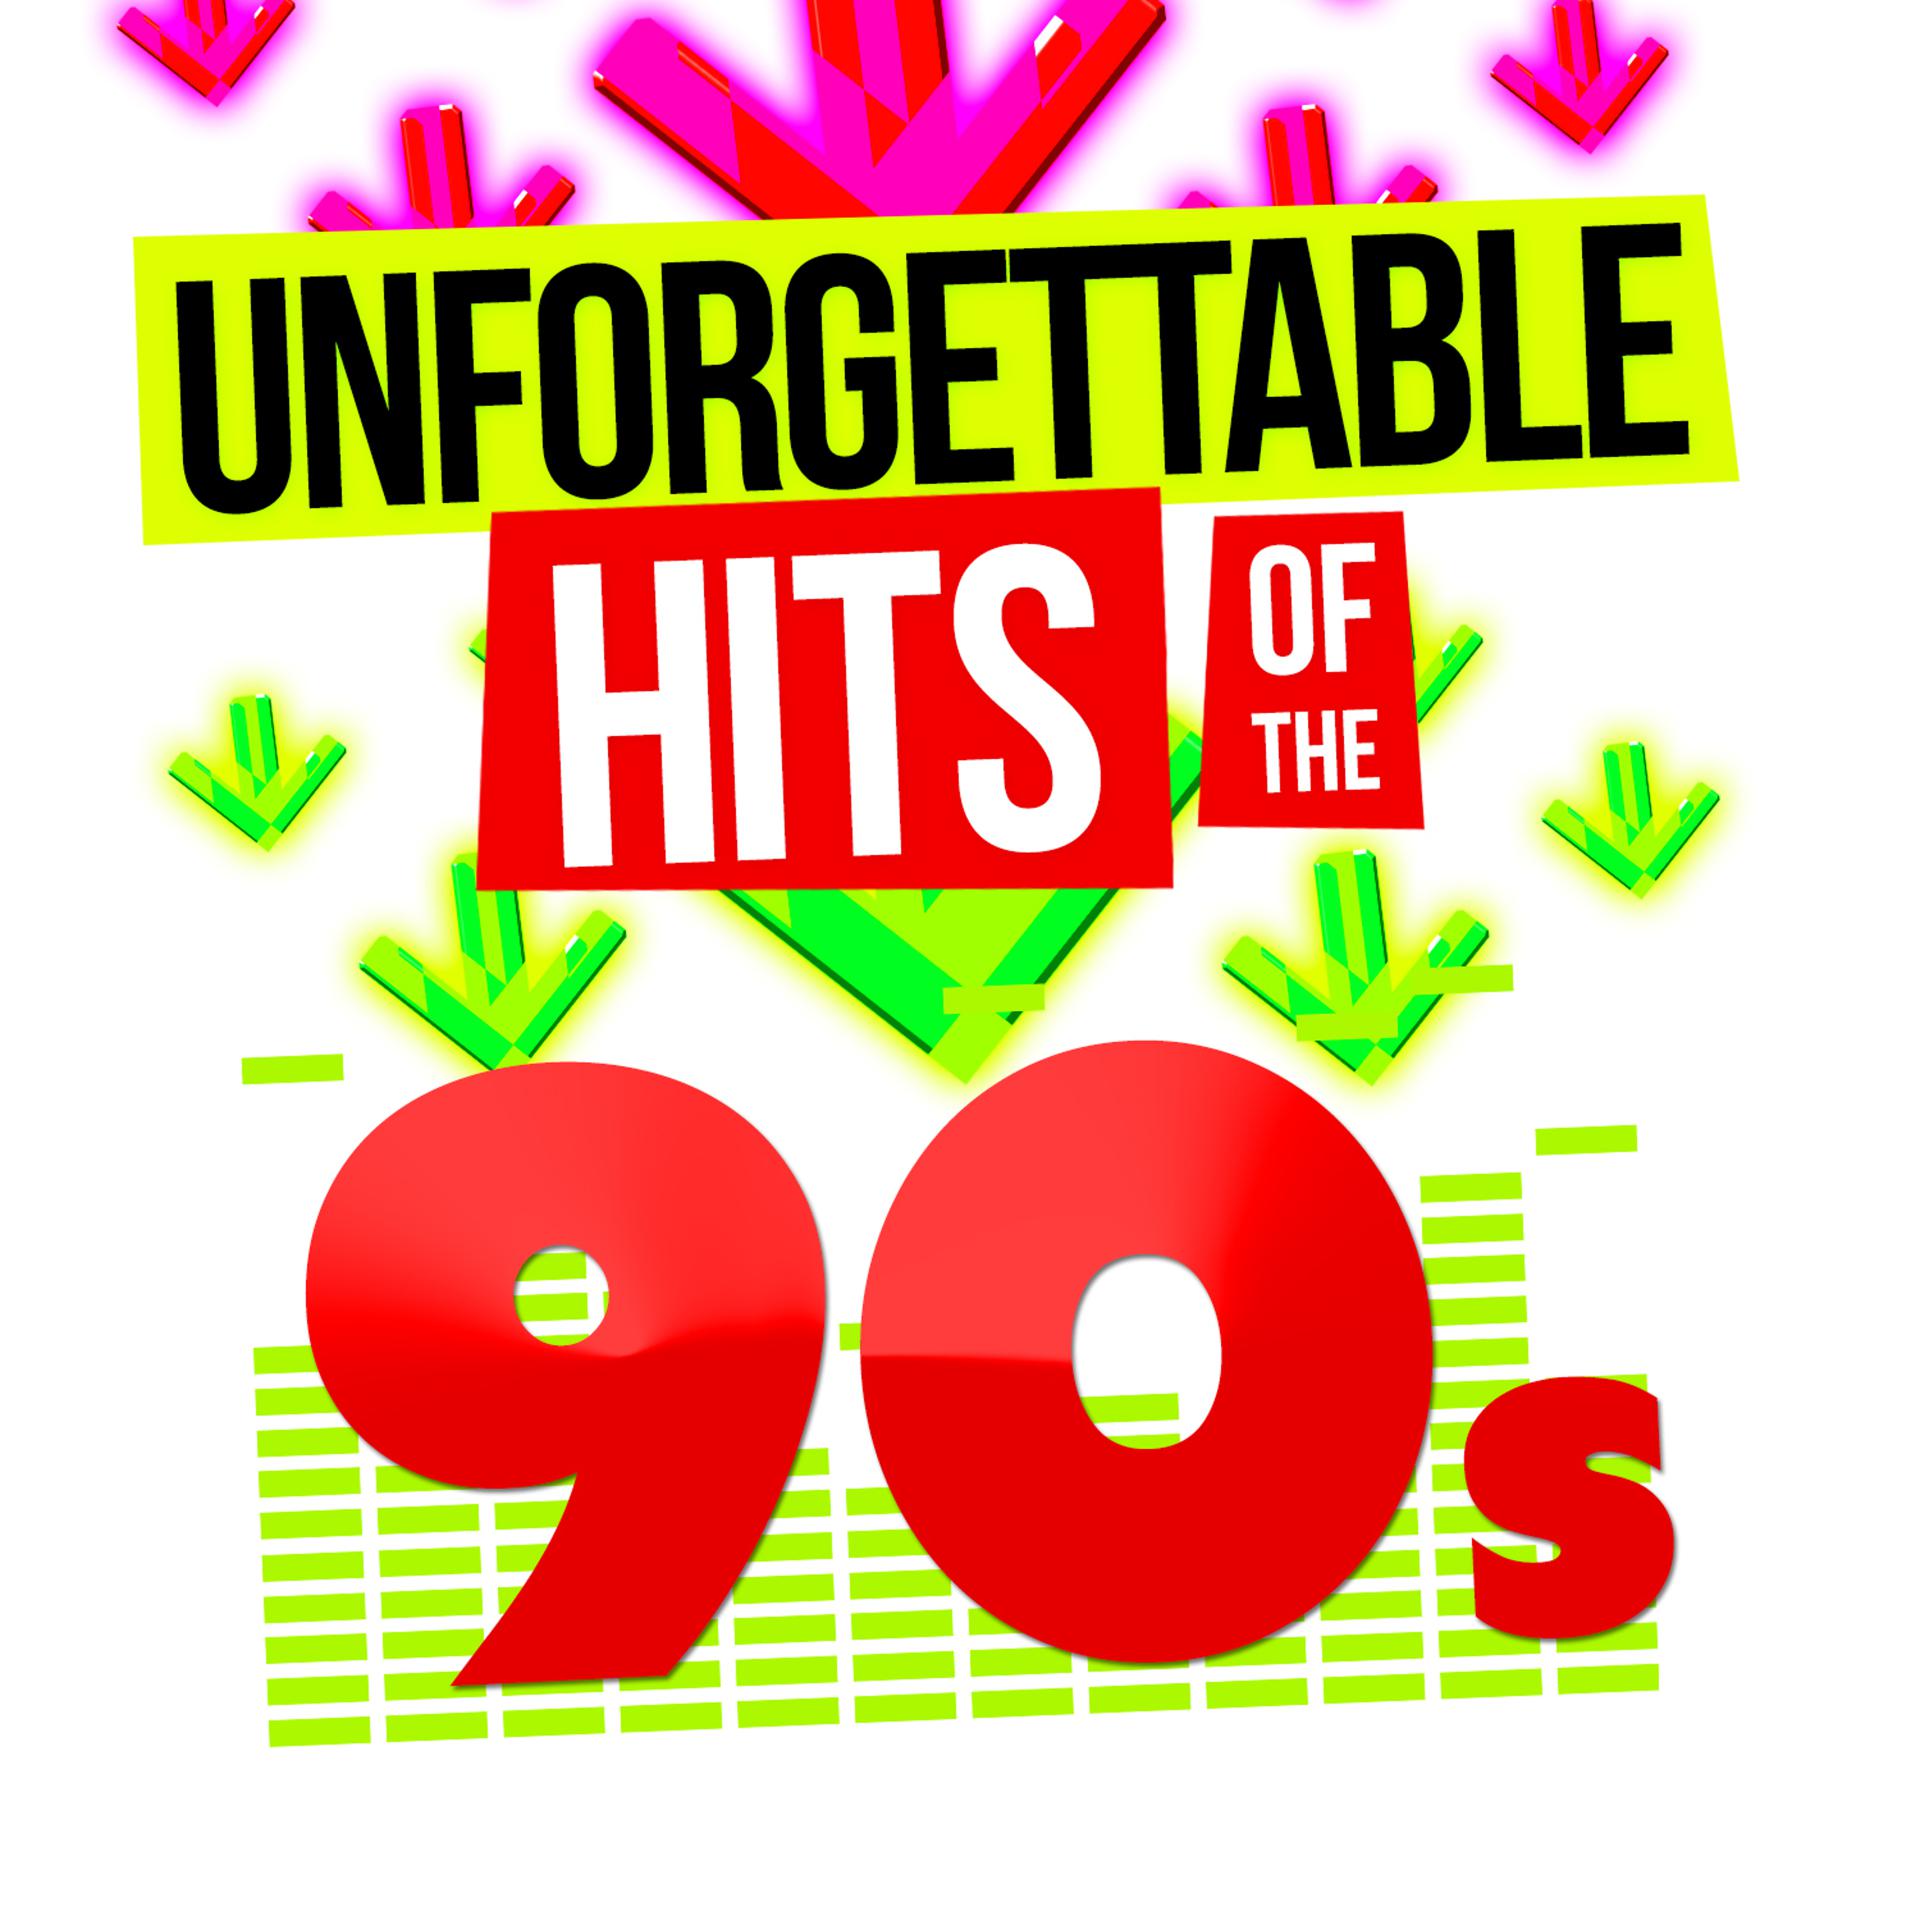 Pop Hits 90s. Dance Hits of the 90s. Best Hits 90. Hits 90 s